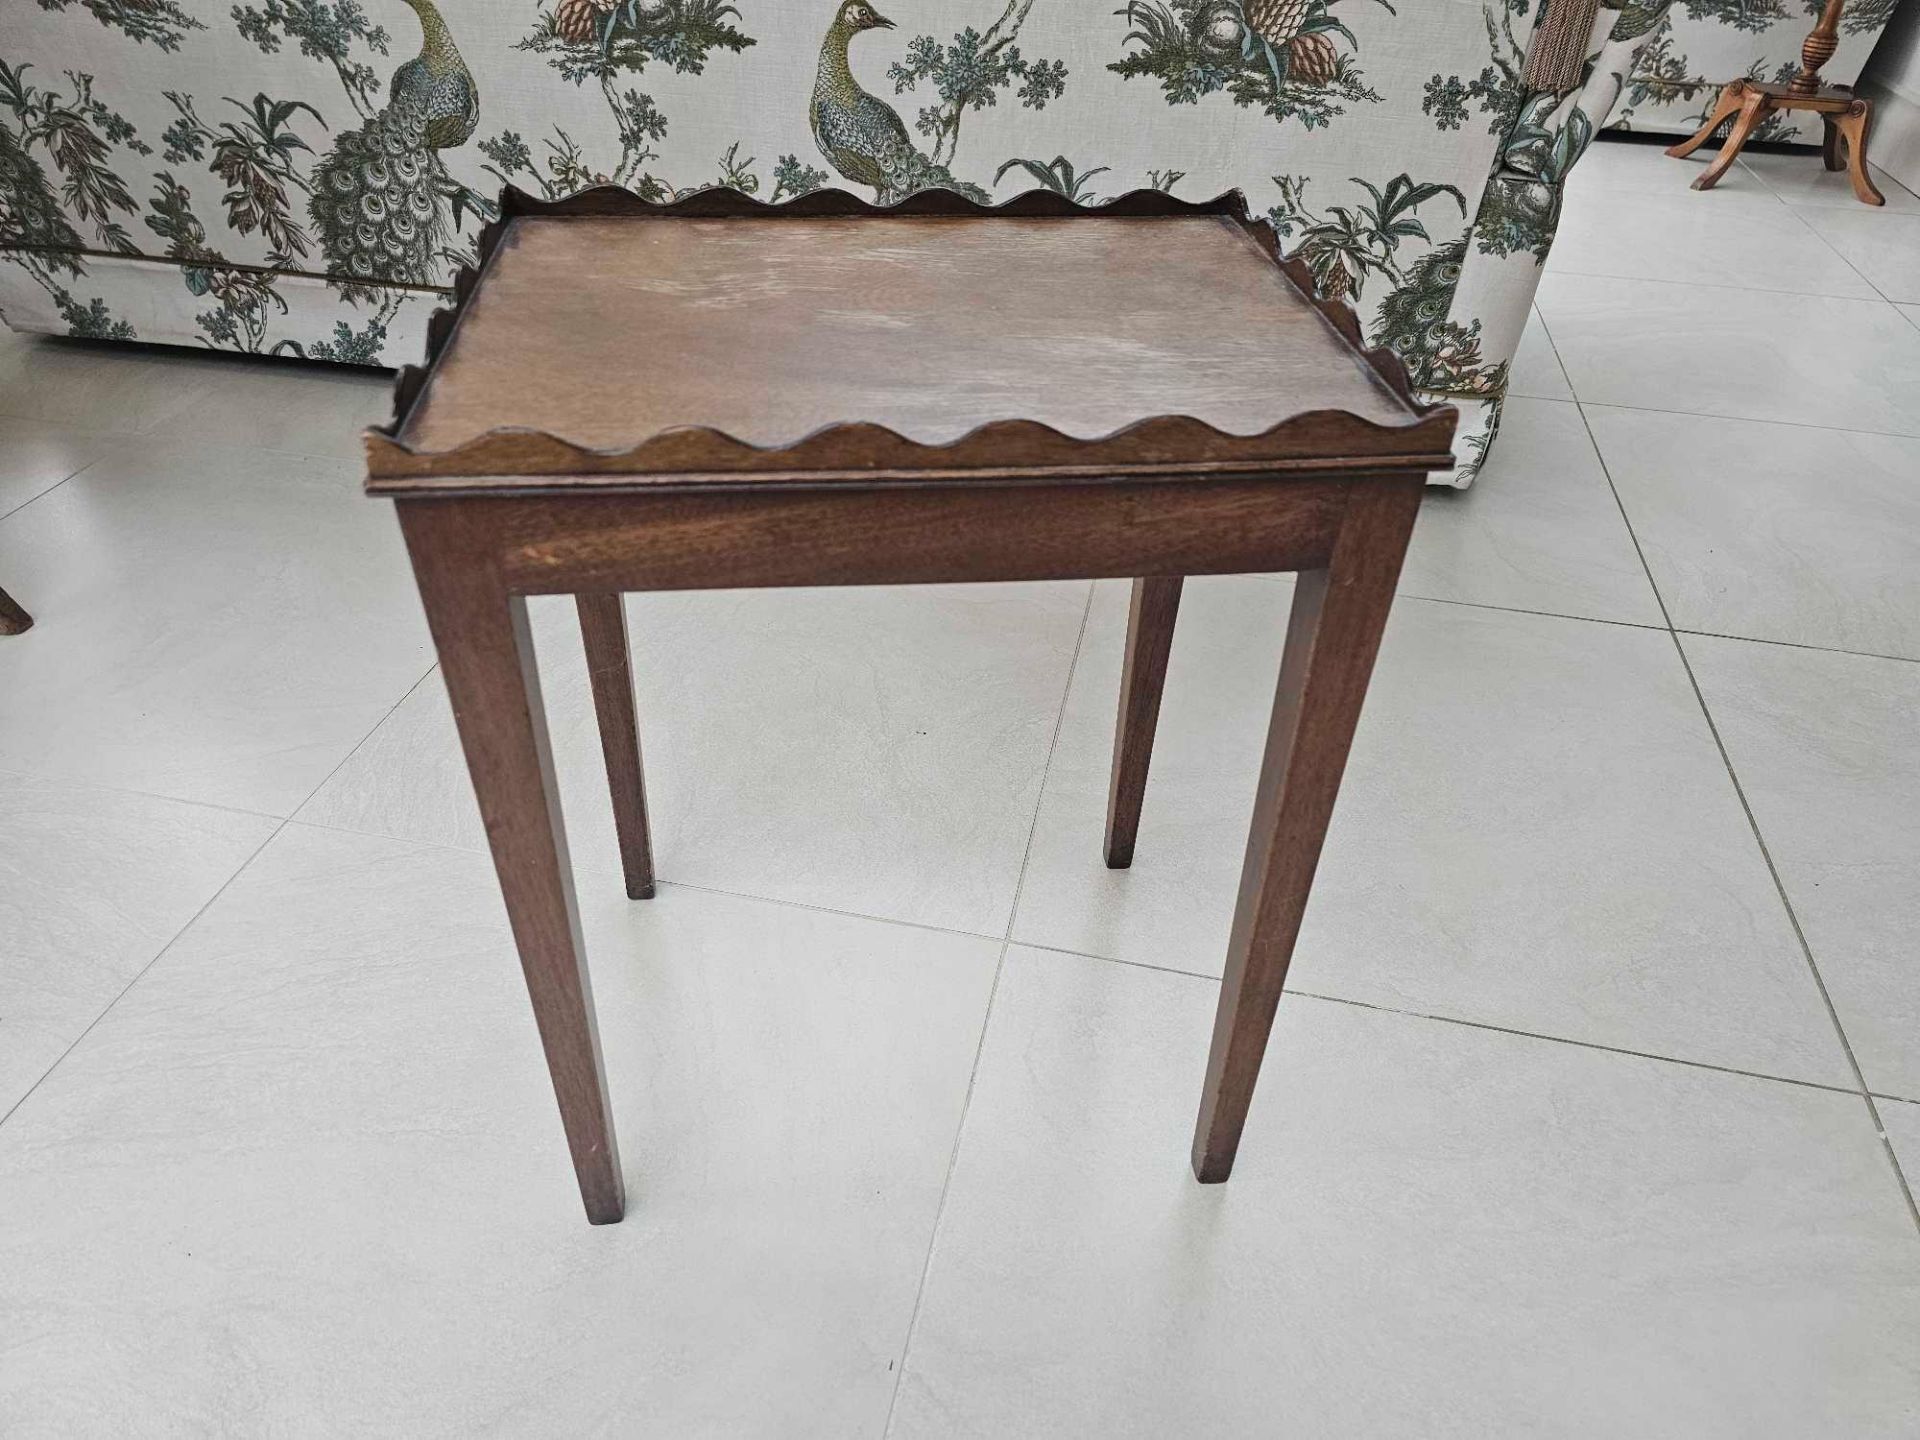 A Scalloped Edge Side Table Raised On Square Tapering Legs 42 X 32 X 52cm